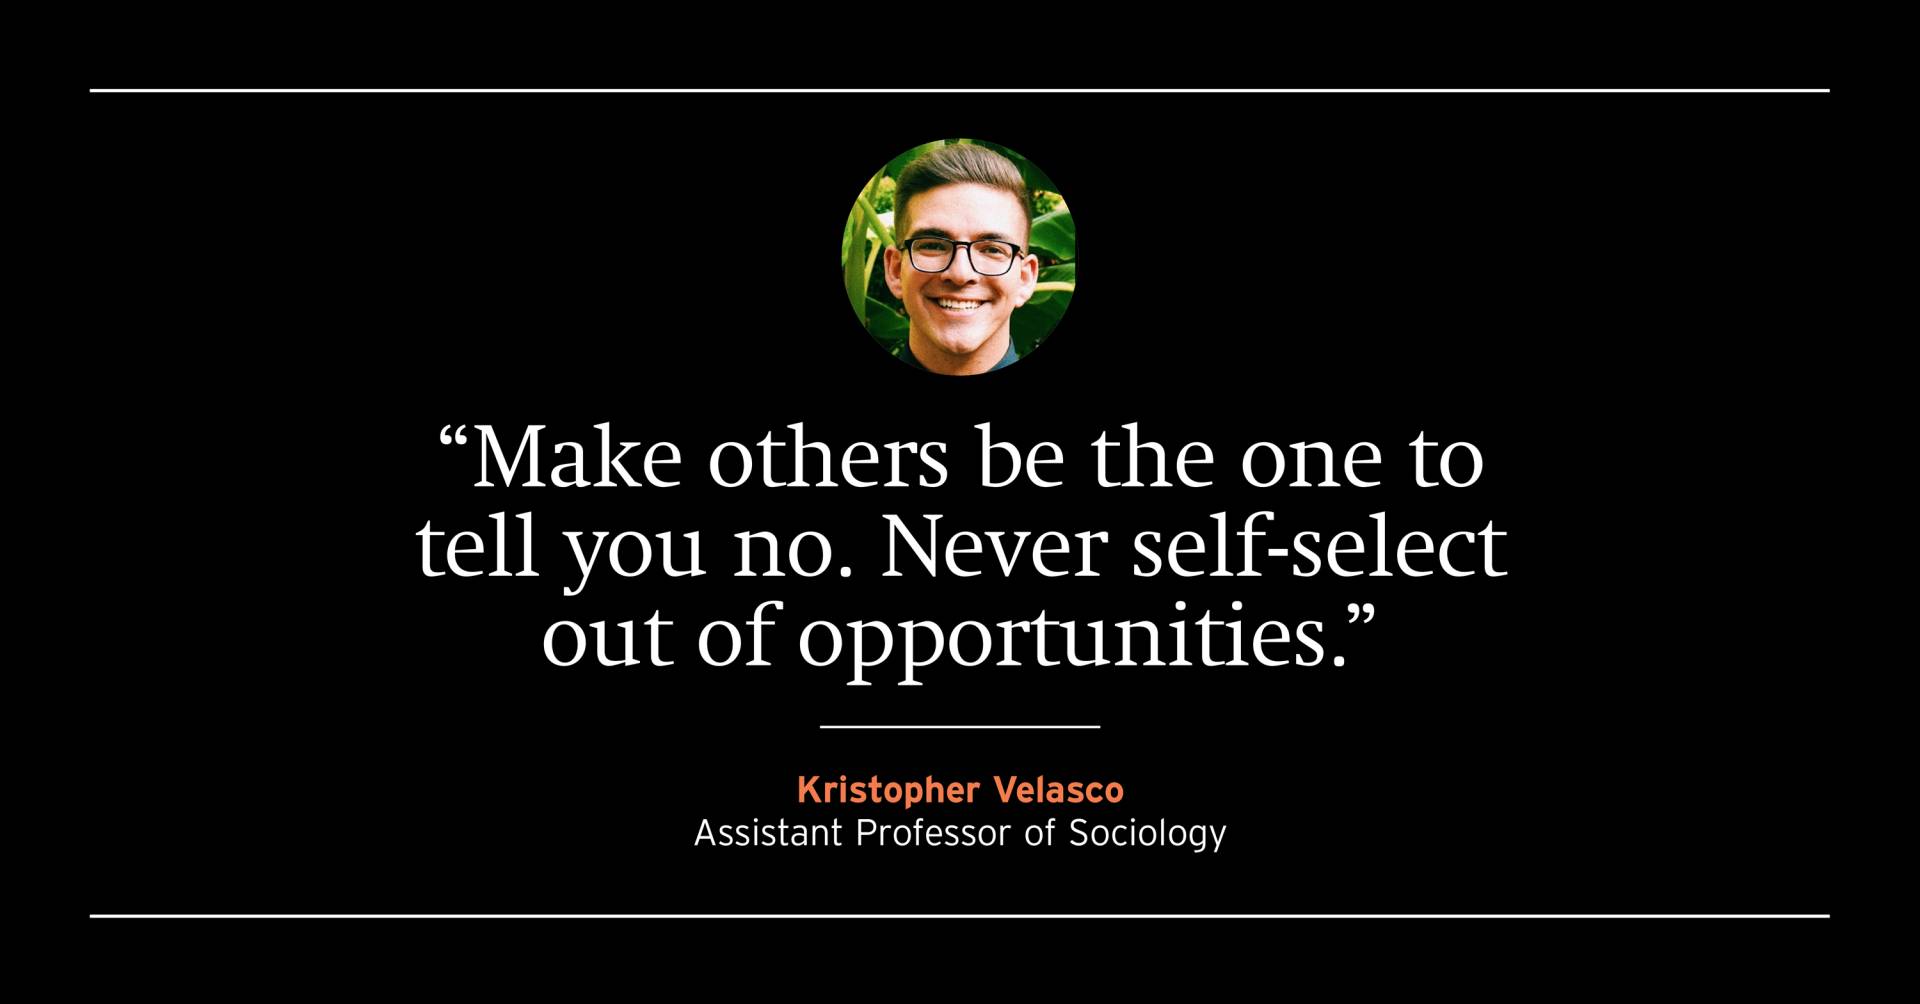 "Make others be the one to tell you no. Never self-select out of opportunities." Kristopher Velasco, assistant Professor of Scoiology 